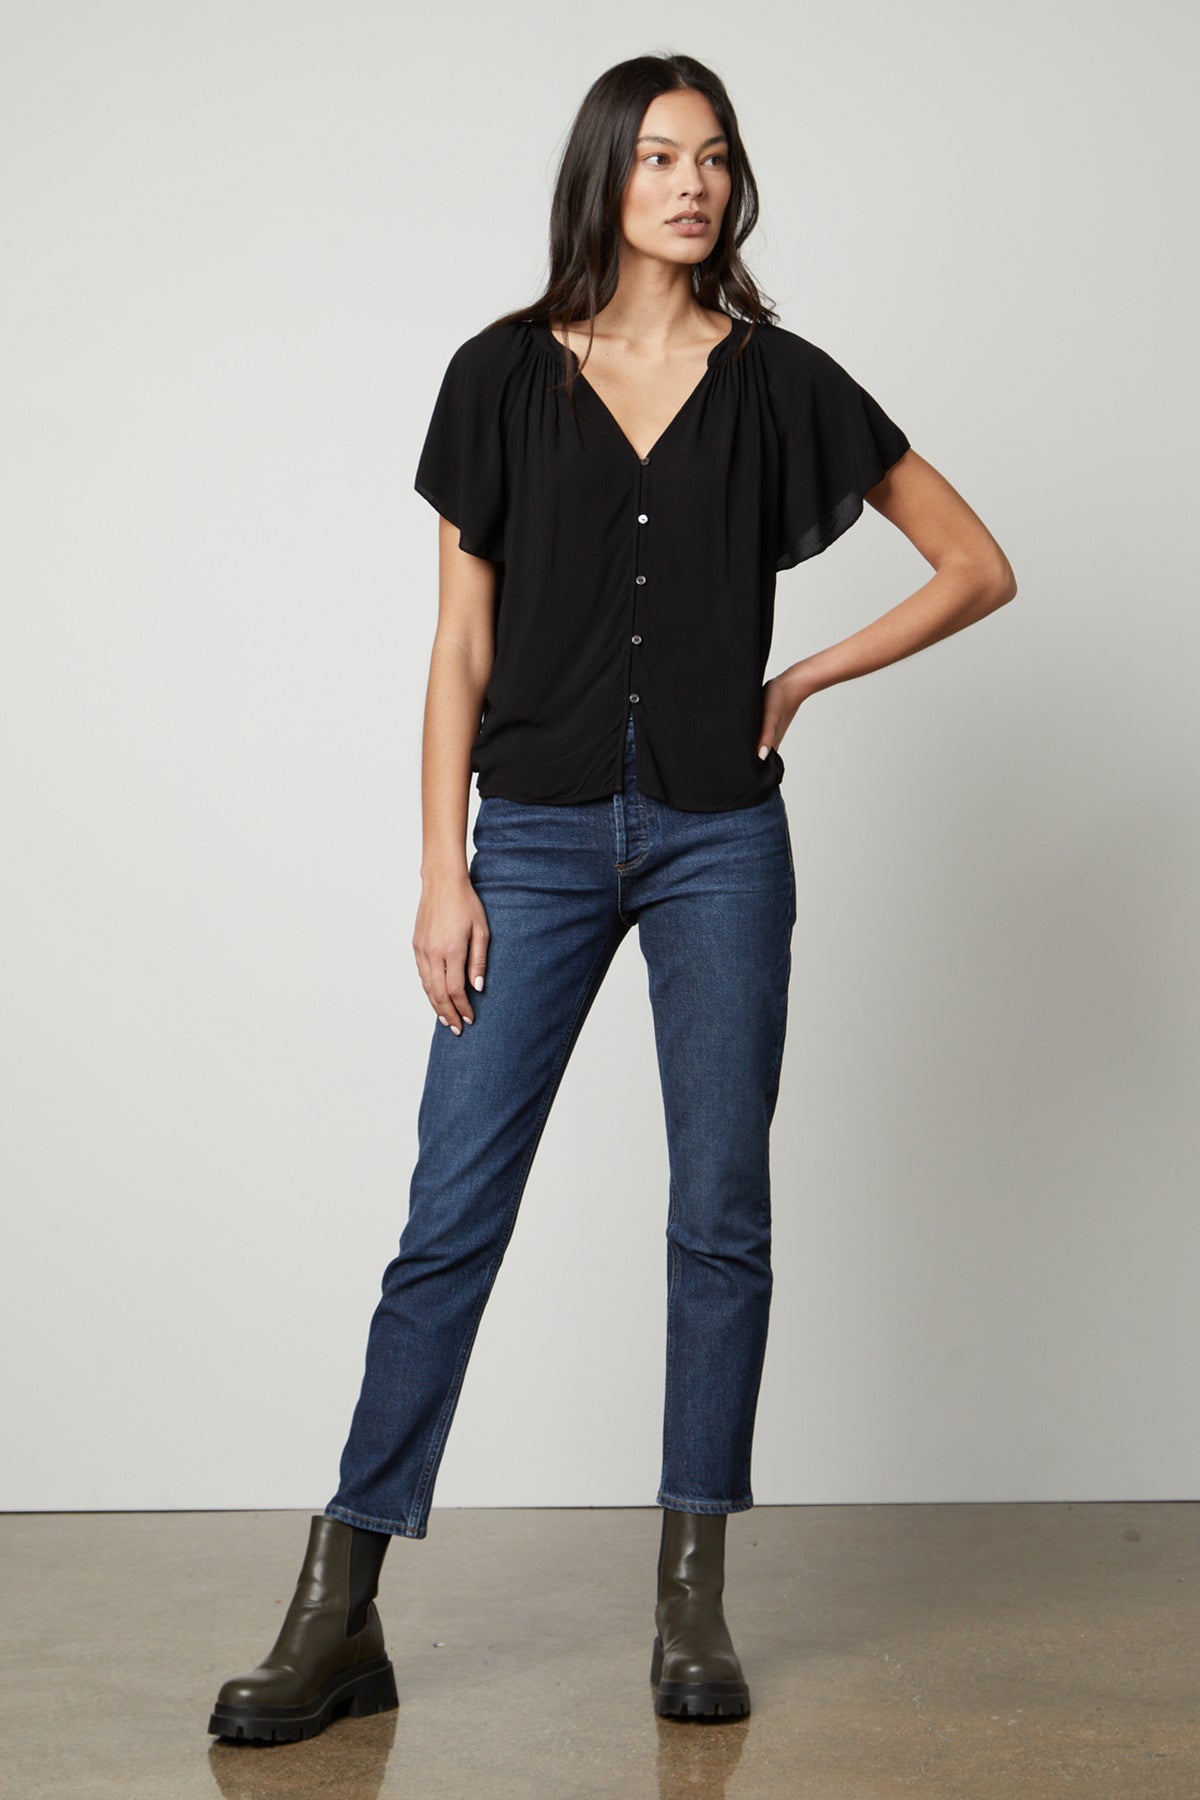 The Harley Flutter Sleeve top in black by Velvet by Graham & Spencer with jeans and boots full length front-26727735361729